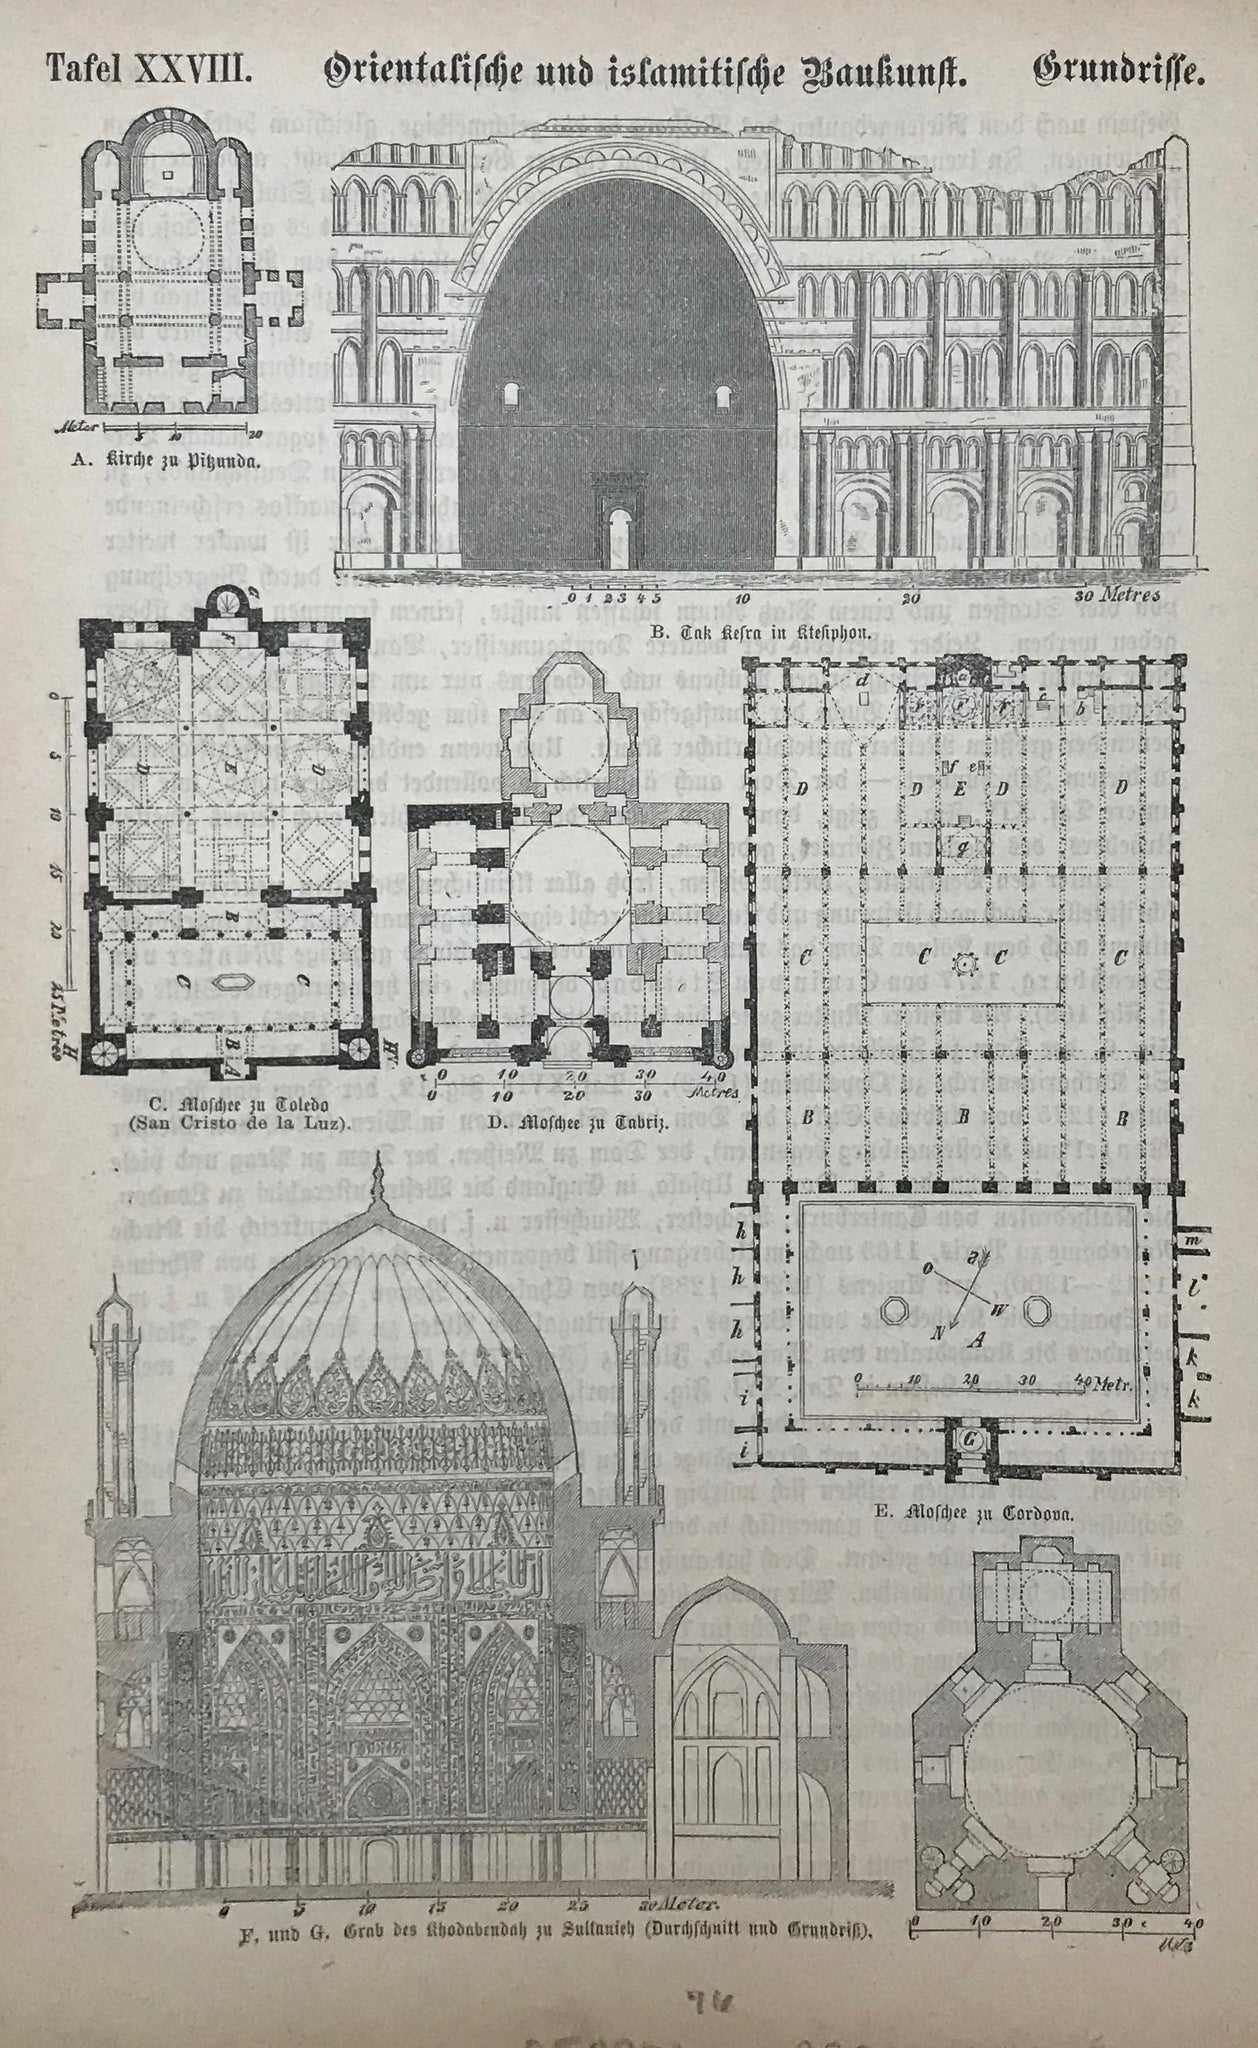 "Orientalische und islamische Baukunst"  Wood engraving published 1876 showing details of mosques in Toledo, Tabris and Cordoba.